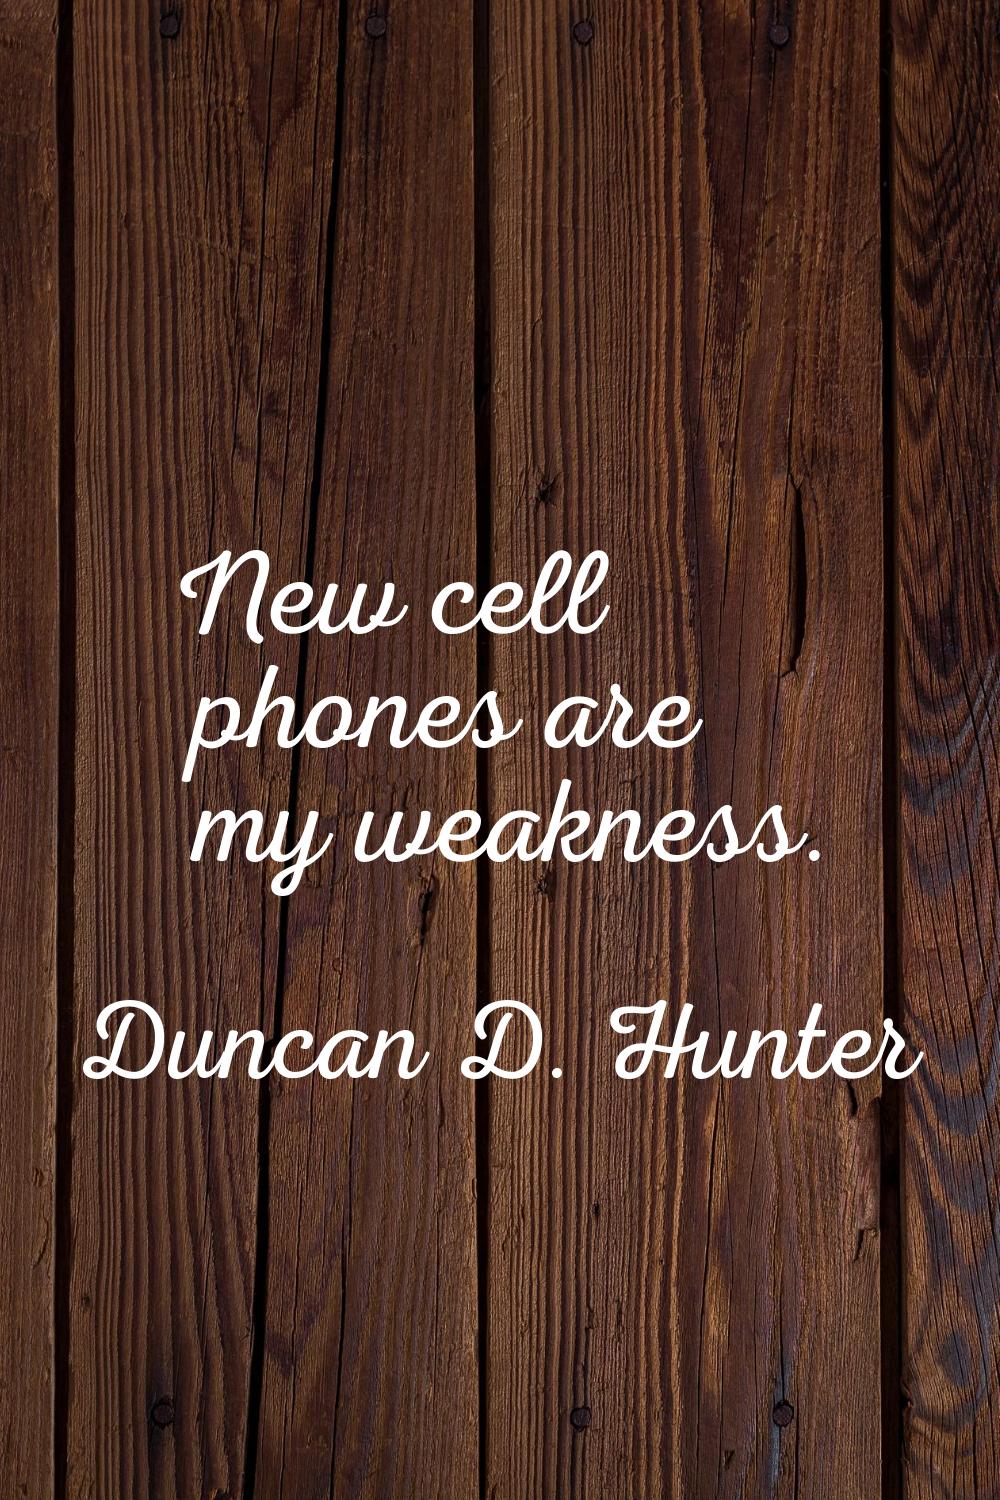 New cell phones are my weakness.